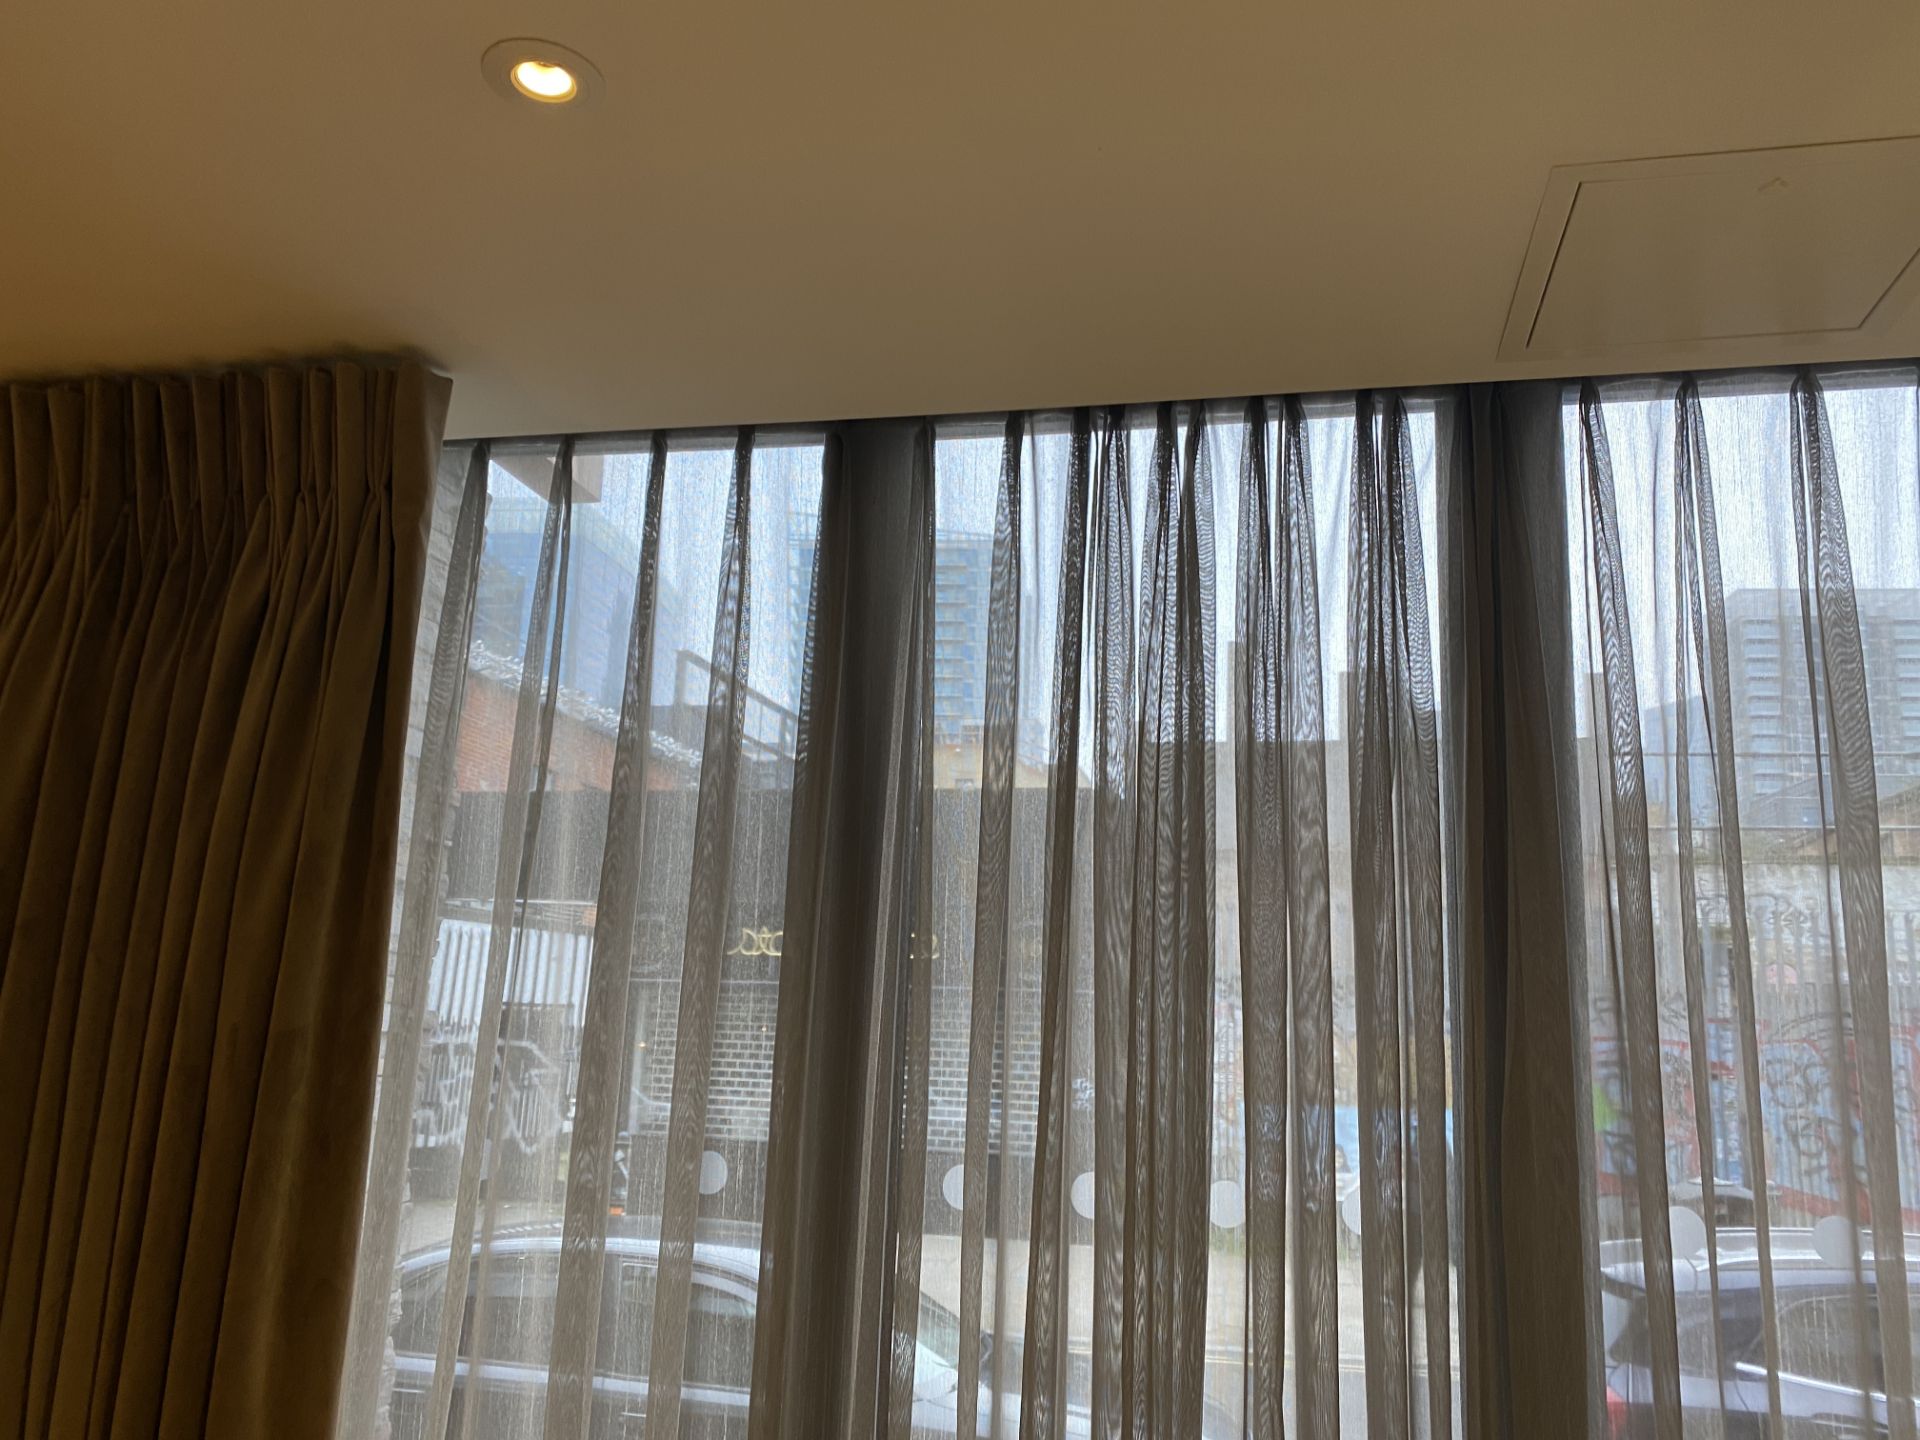 Commercial grade luxury blackout curtains - Image 4 of 5